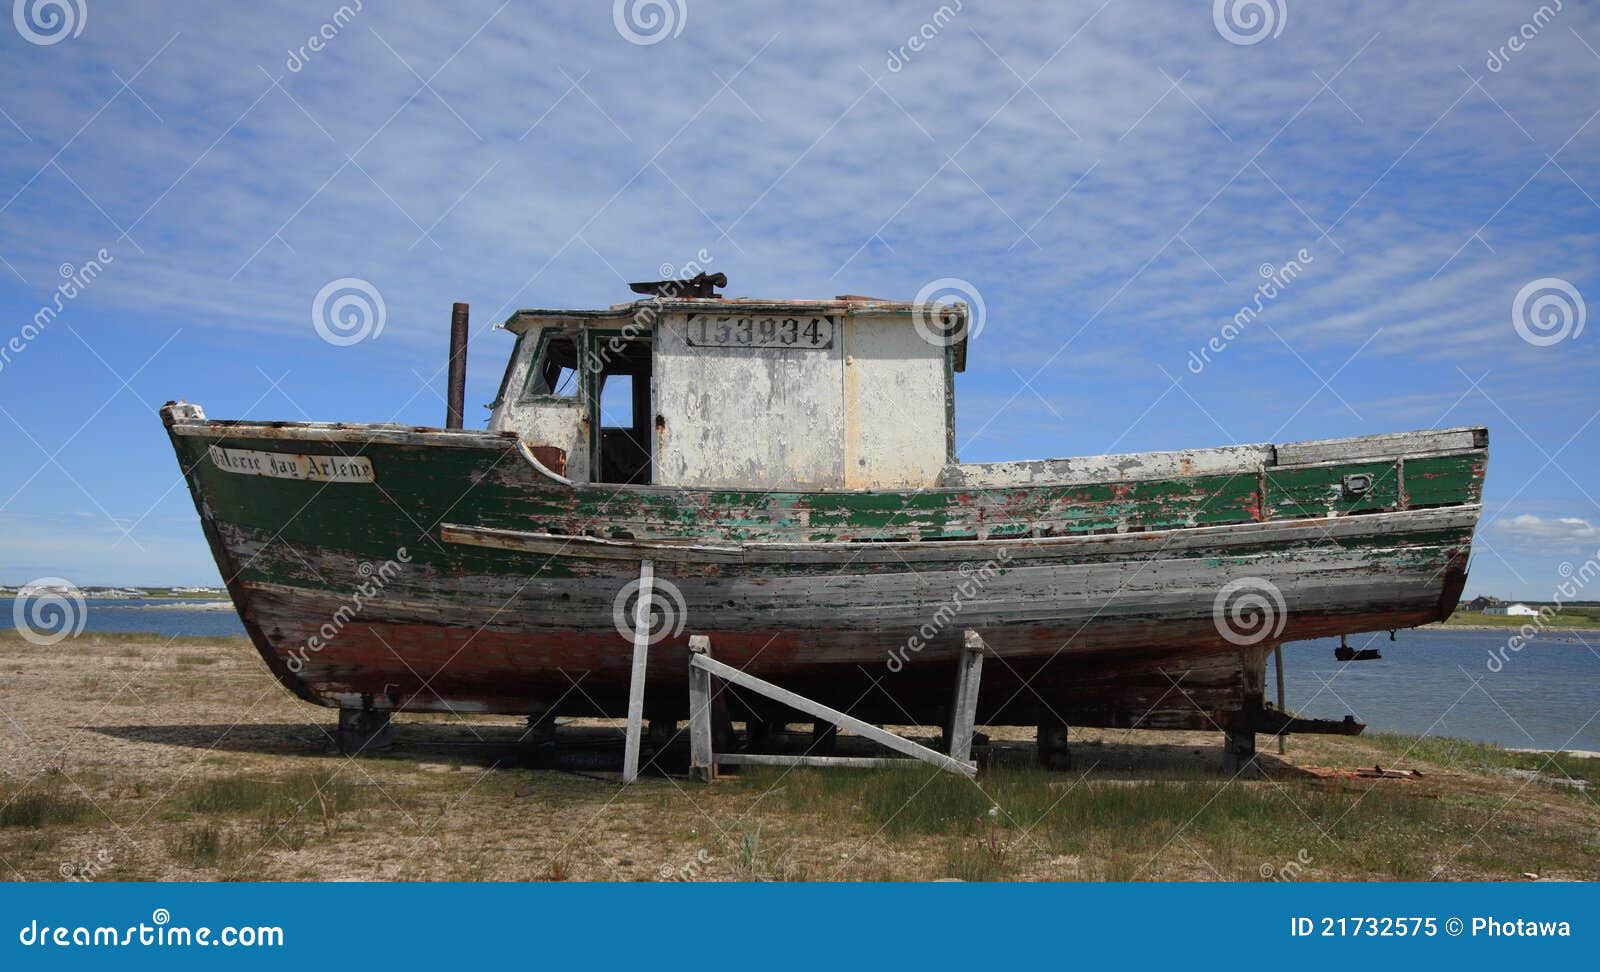  boat sits abandoned on July 23, 2011 in Flower’s Cove, Newfoundland